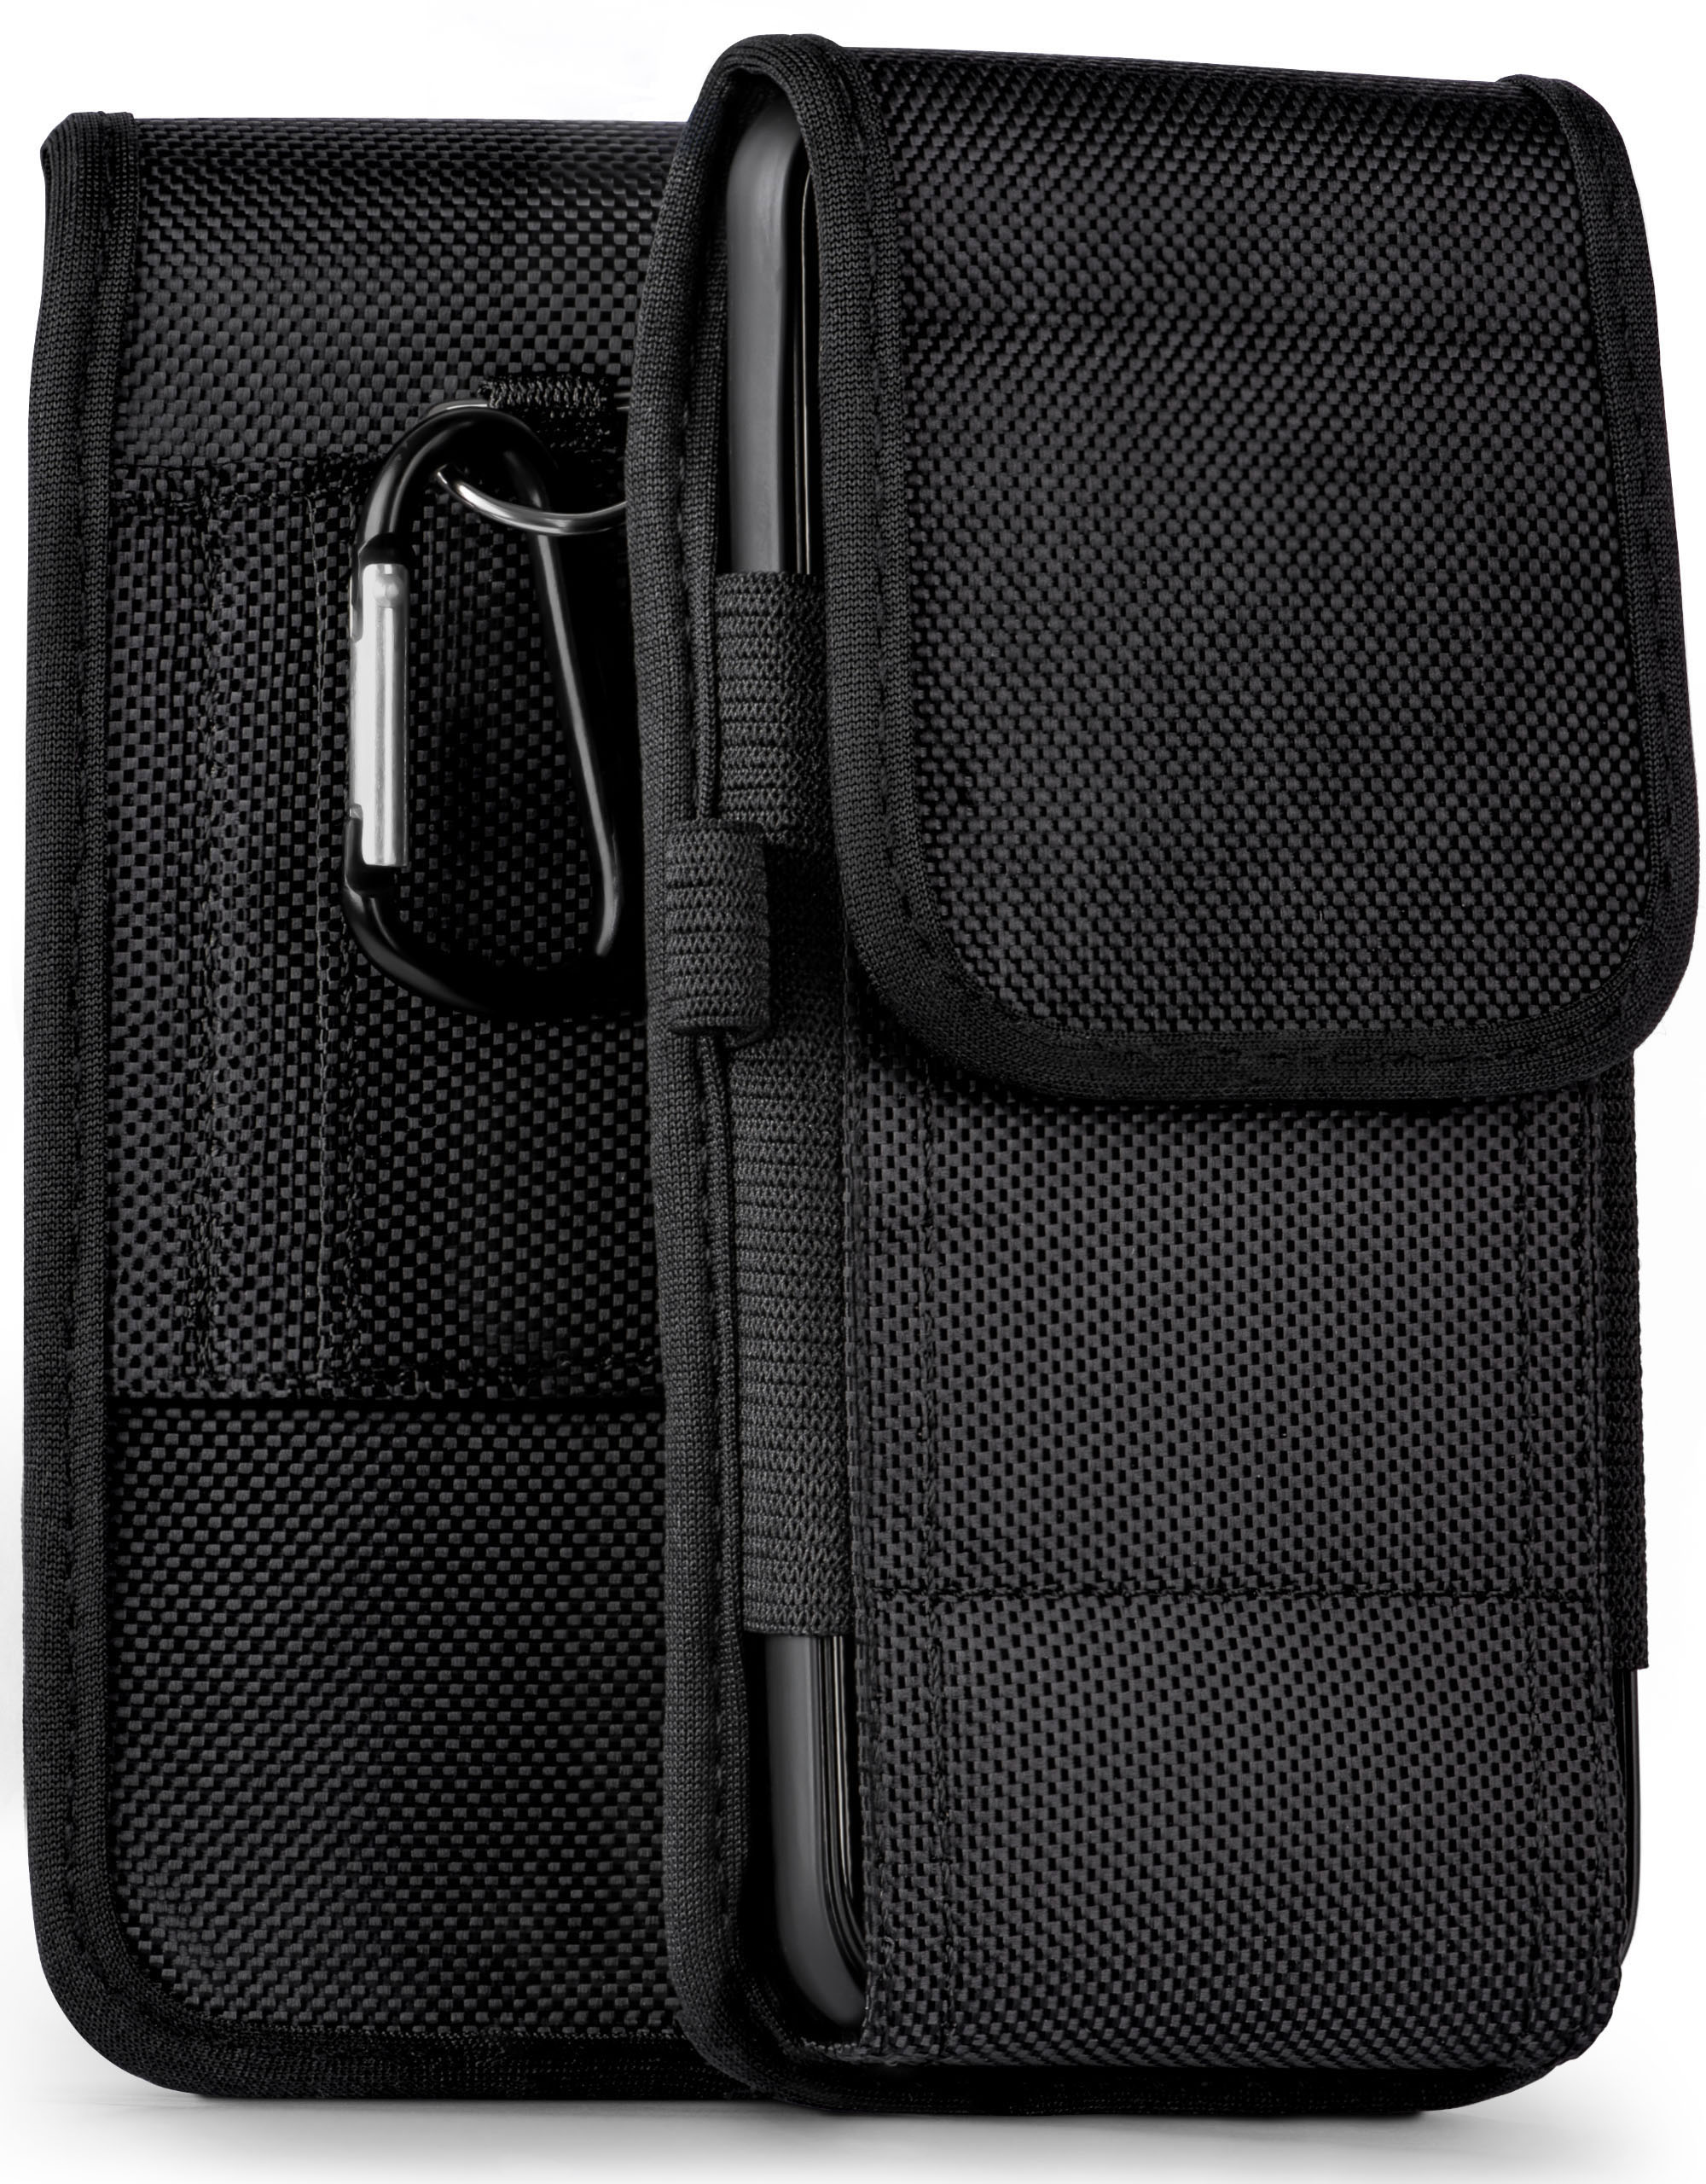 Agility Trail MOEX Case, 1x Alcatel, (2019), Holster,